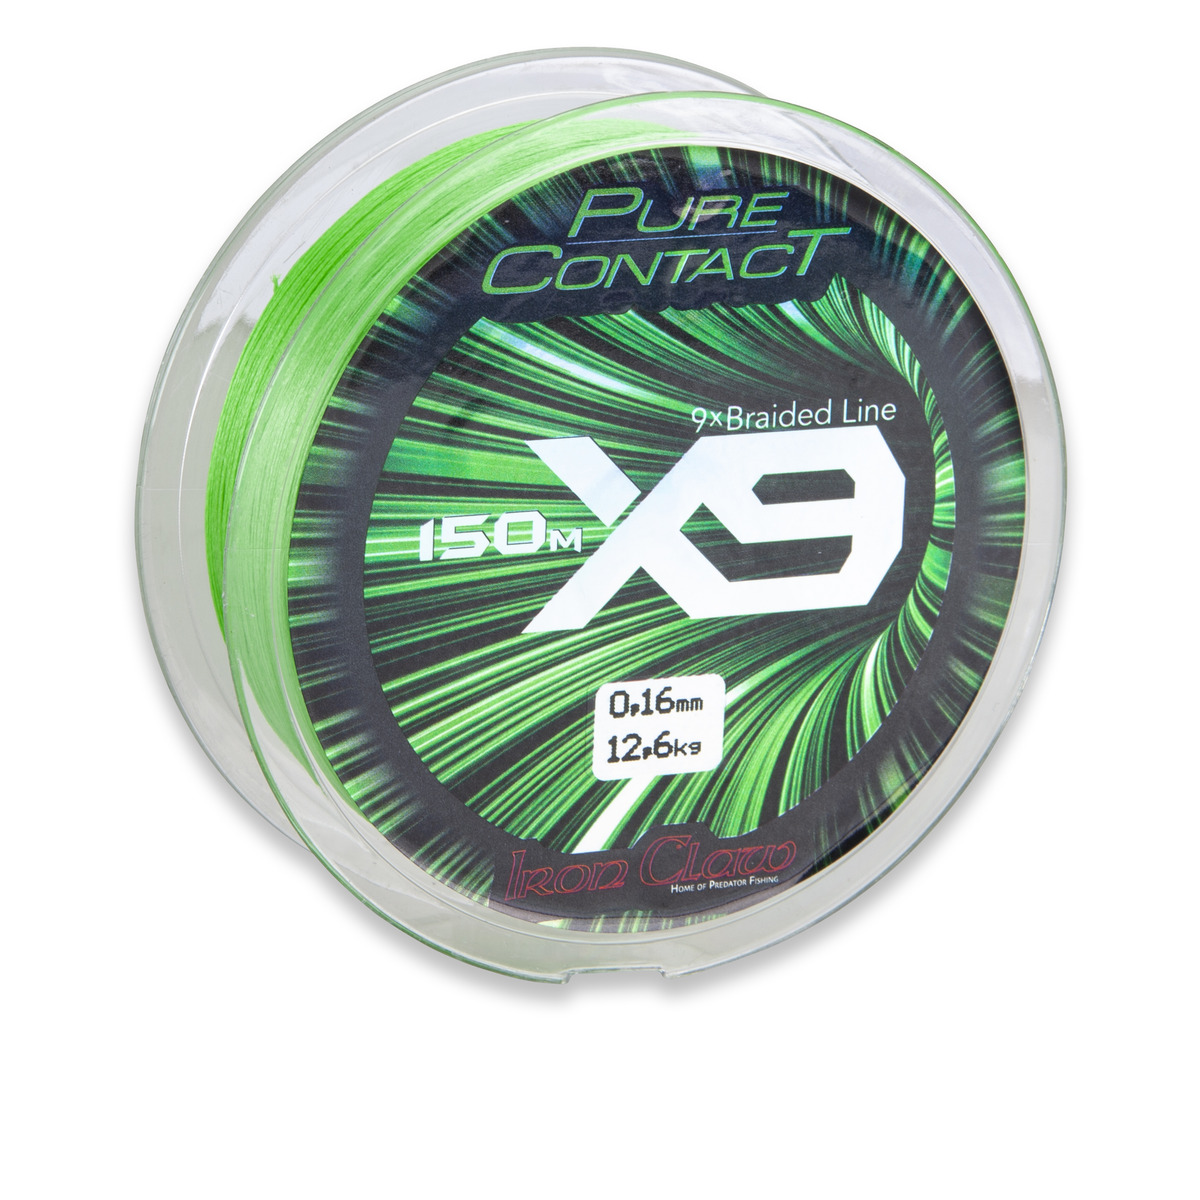 Iron Claw Pure Contact X9 Green - 1500 m 0.18 mm